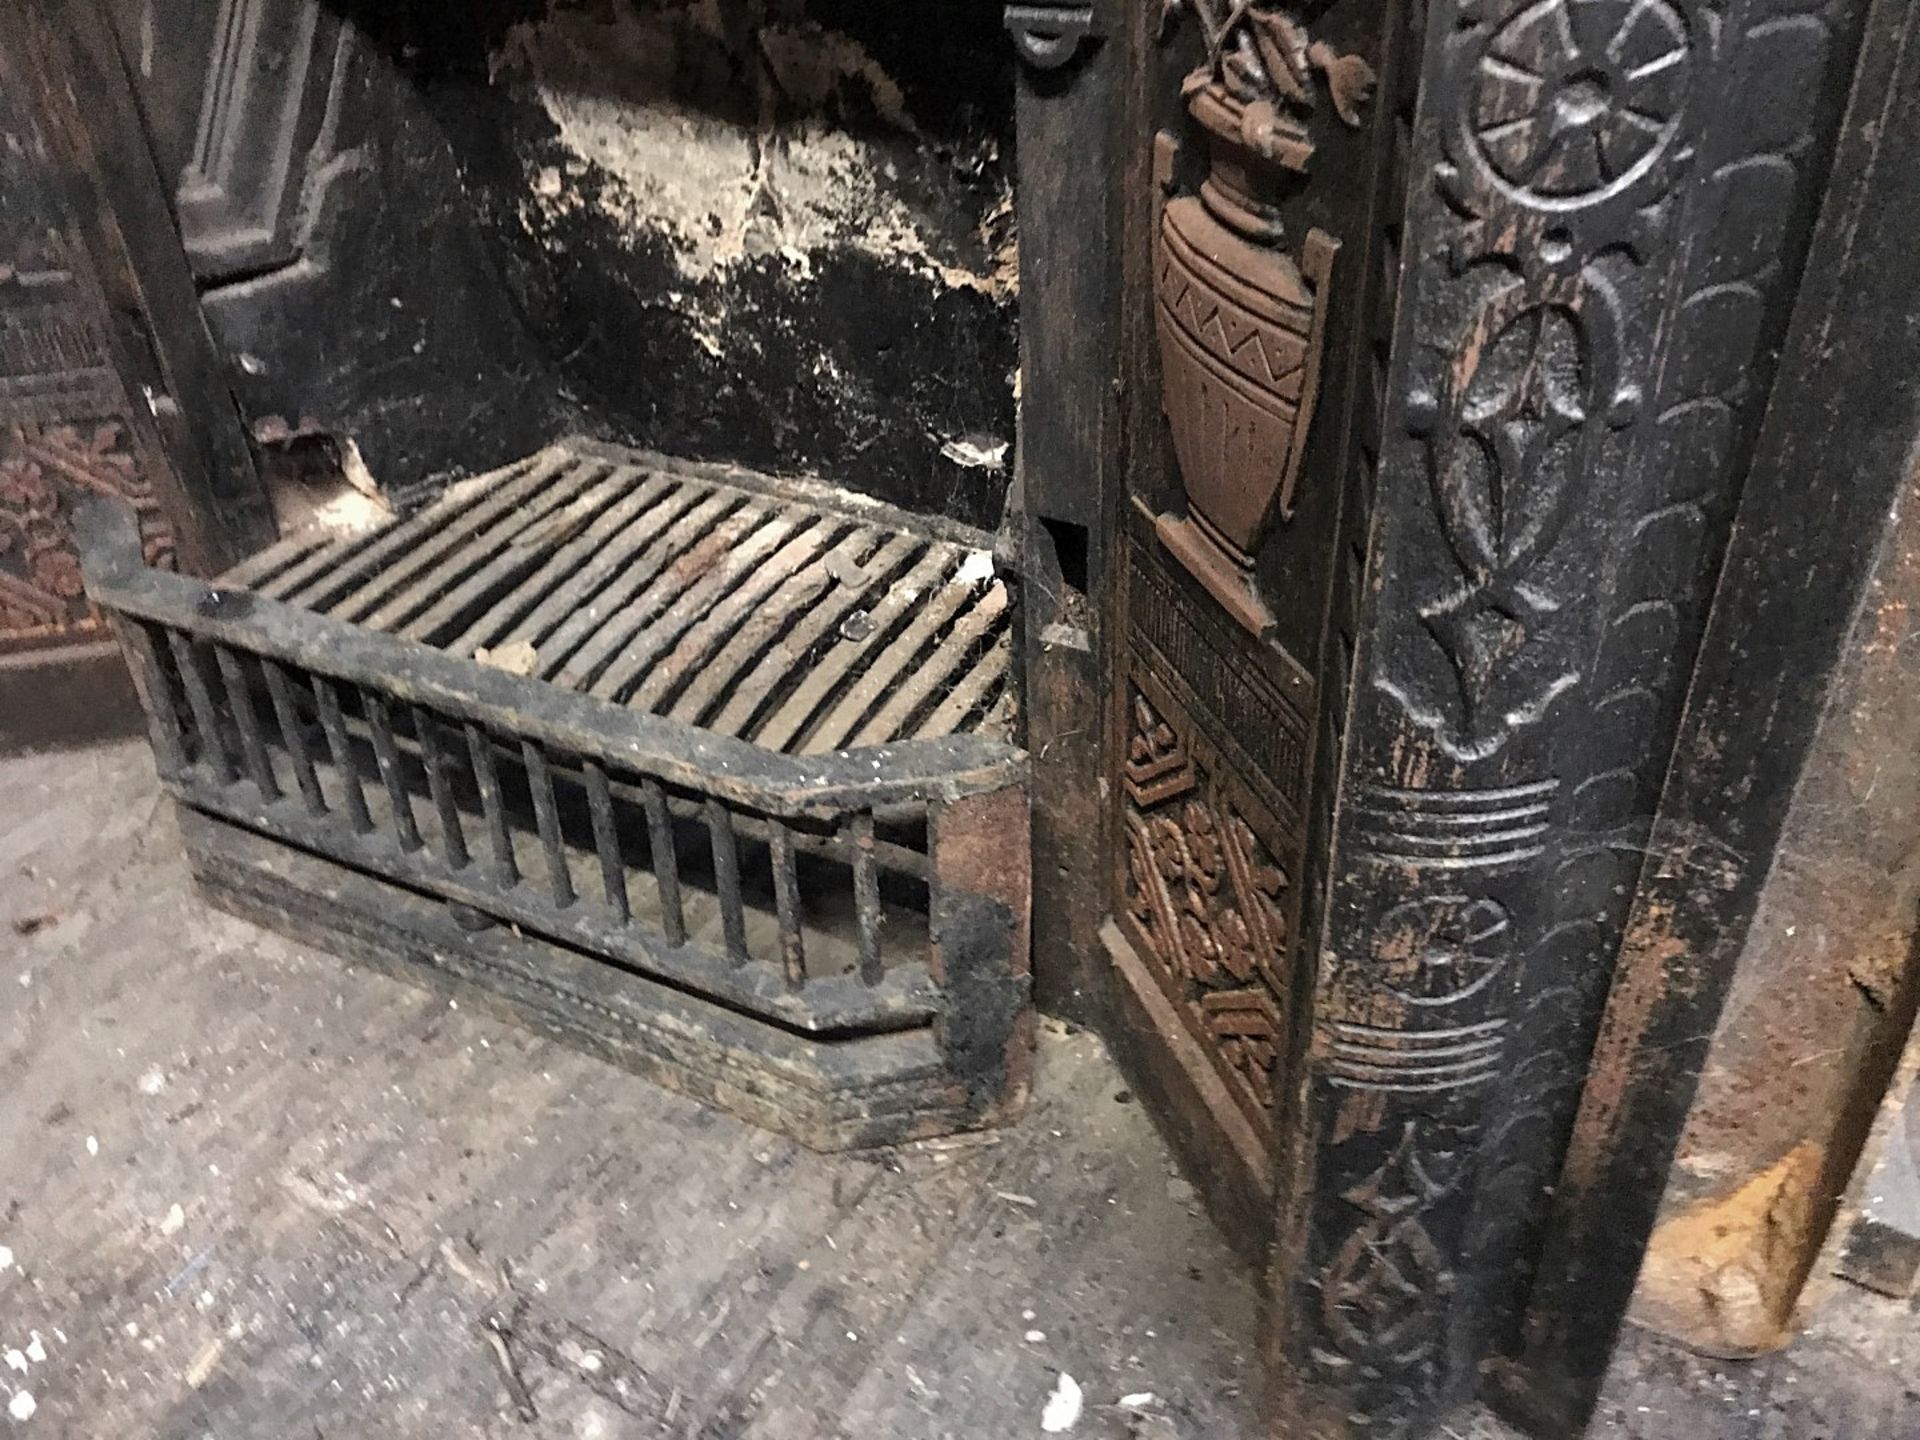 1 x Ultra Rare Stunning Antique Victorian Cast Iron Fire Insert With Ornate Cast Iron Tiles To Side - Image 4 of 5